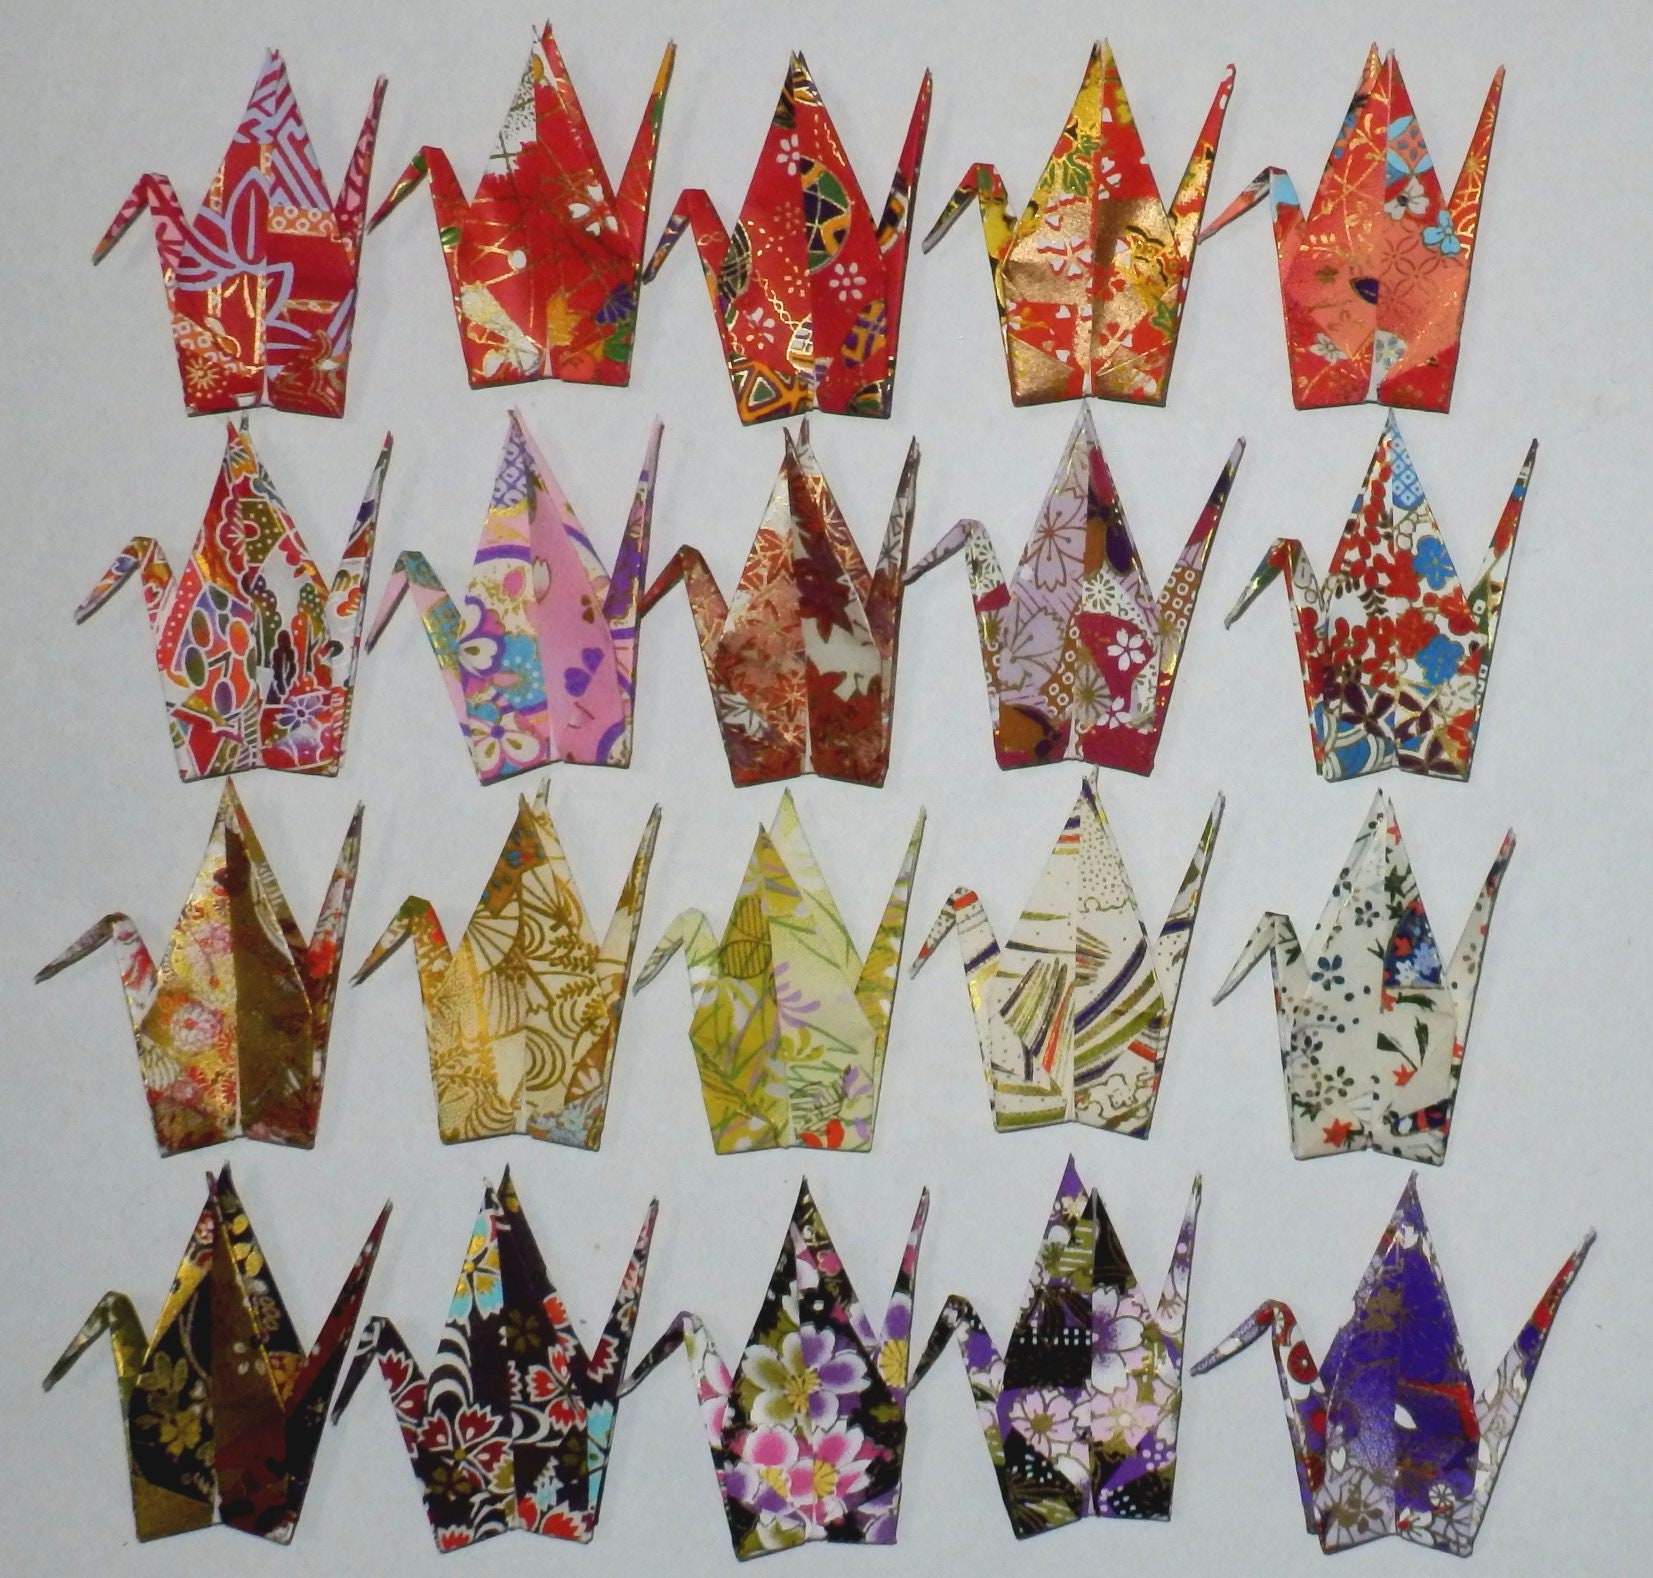 36 Views Mount Fuji 46 Large Origami Cranes Origami Paper Cranes Made of  15cm 6 Inches Japanese Paper Hokusai Ukiyoe Home Decoration Art 